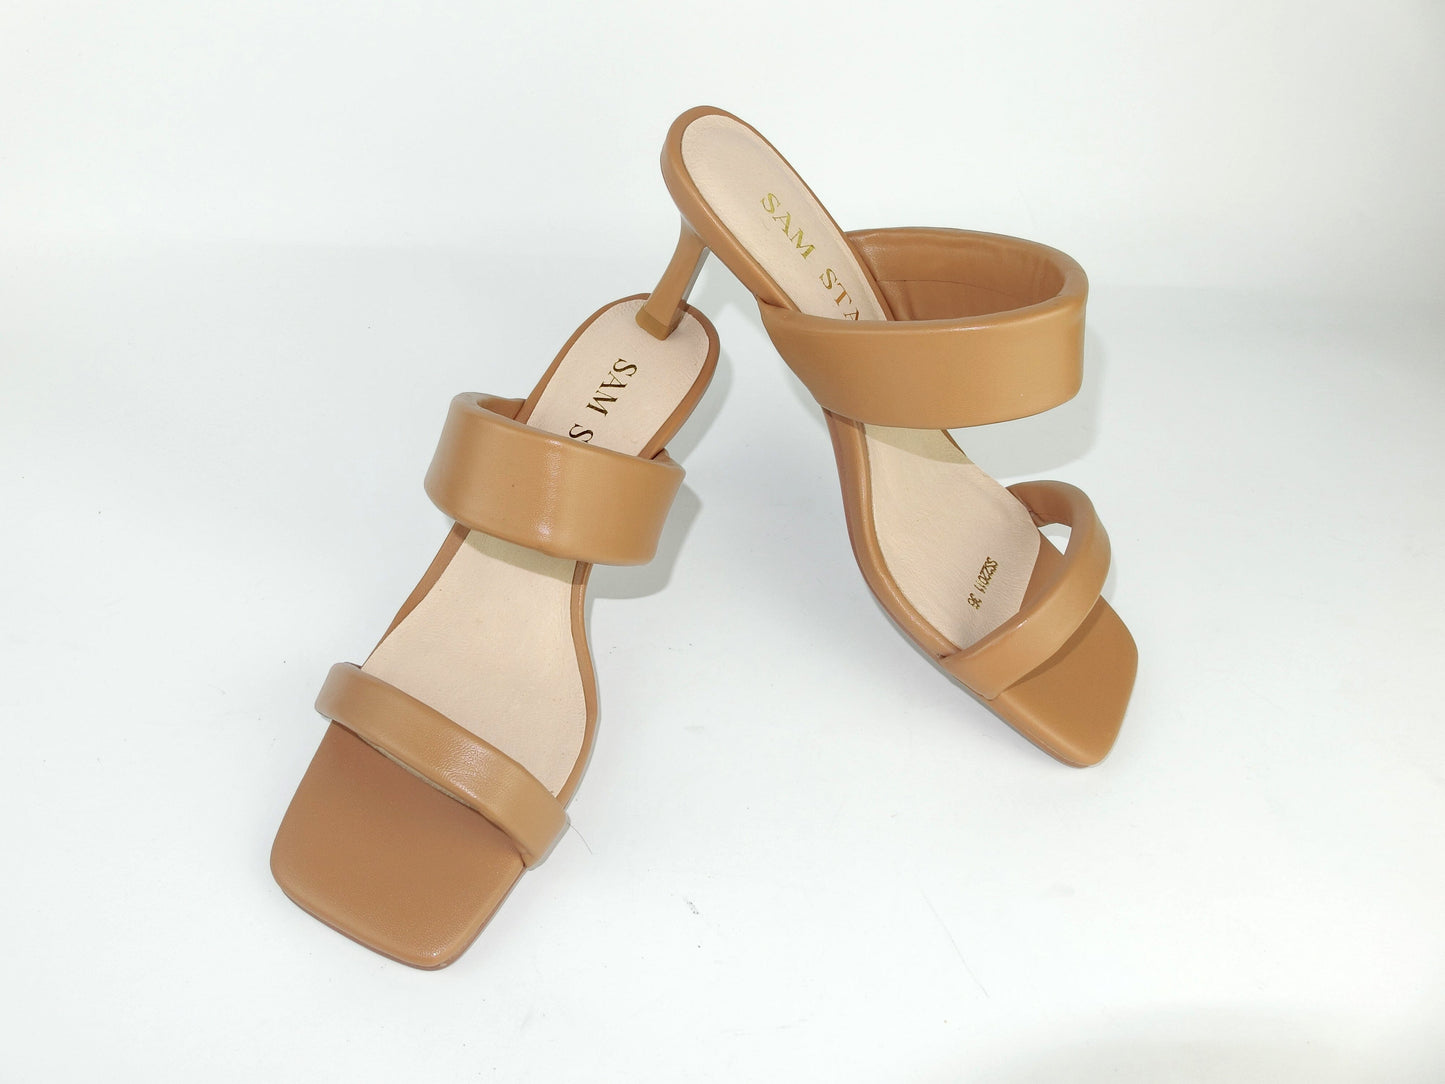 SS22011 Genuine leather puffy straps sandals in Tan sandals Sam Star Shoes 